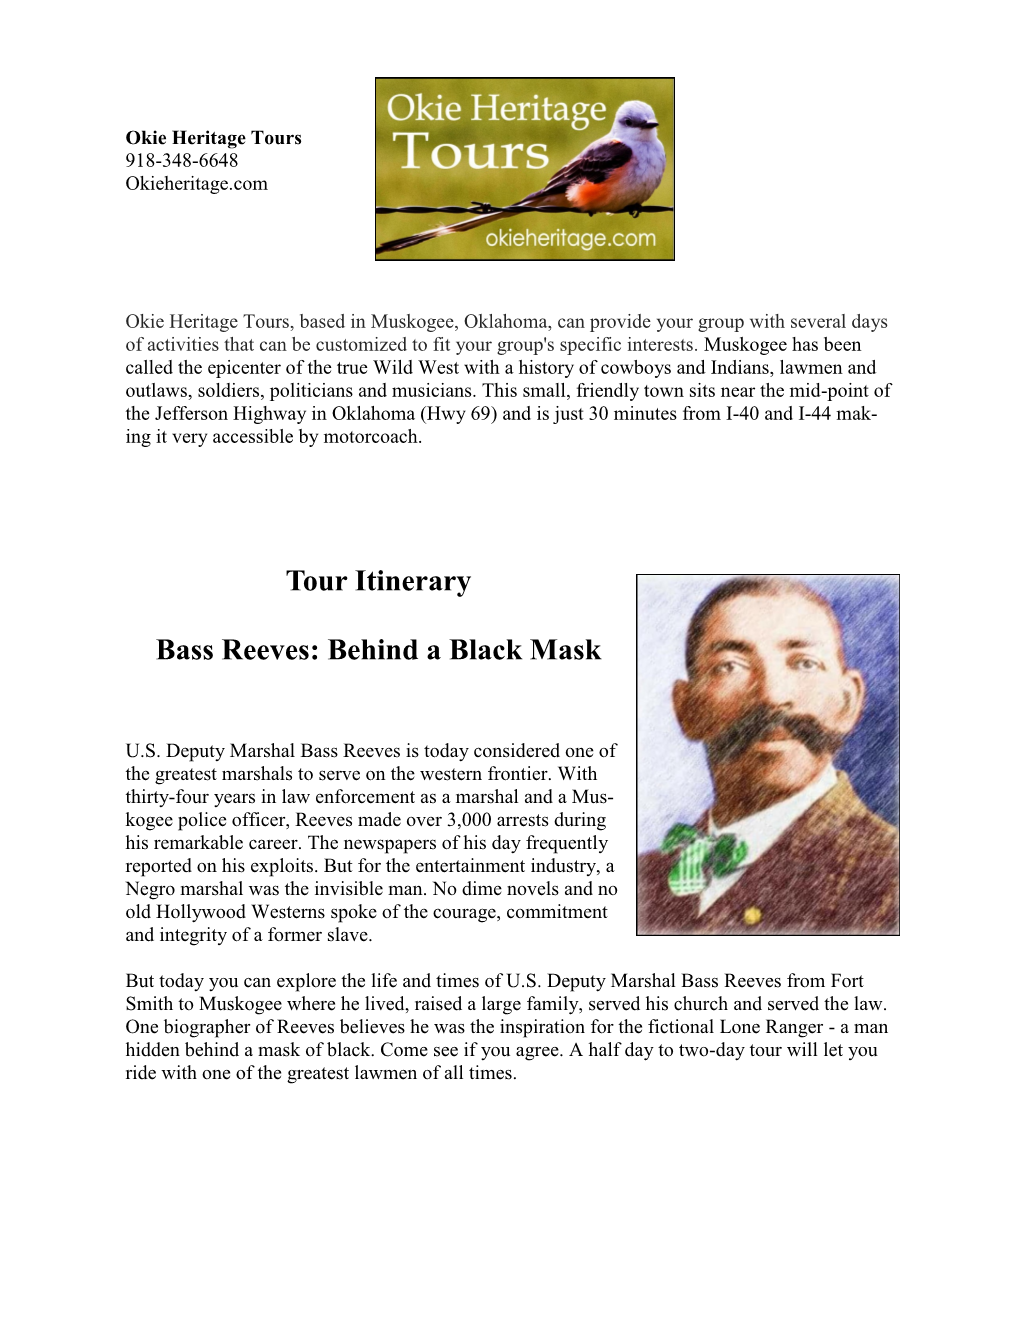 Tour Itinerary Bass Reeves: Behind a Black Mask